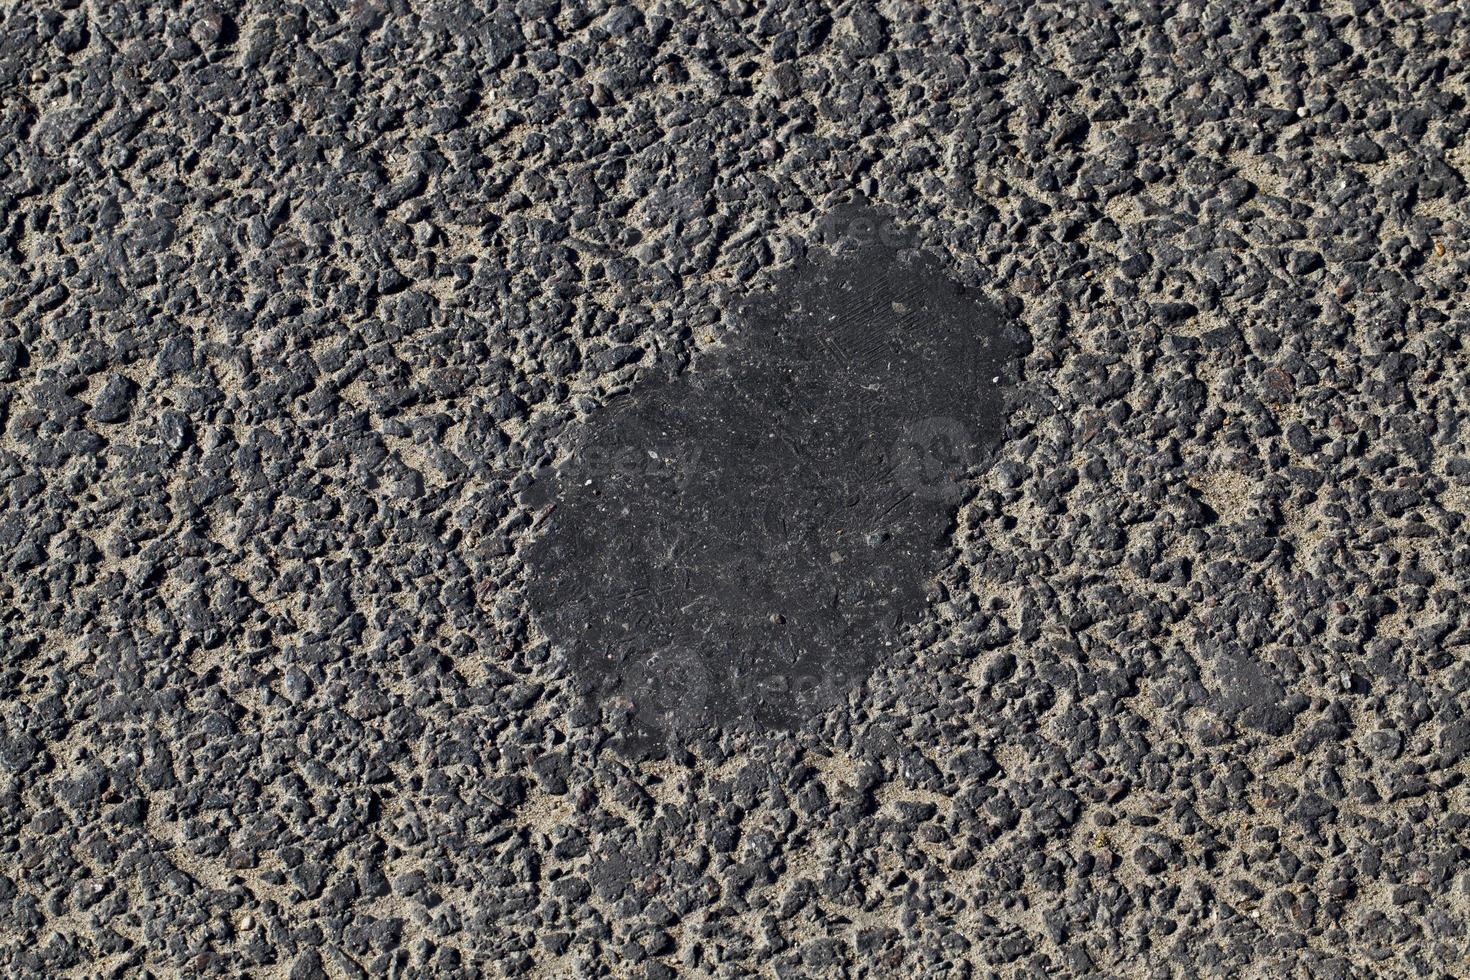 repaired part of the asphalt road photo